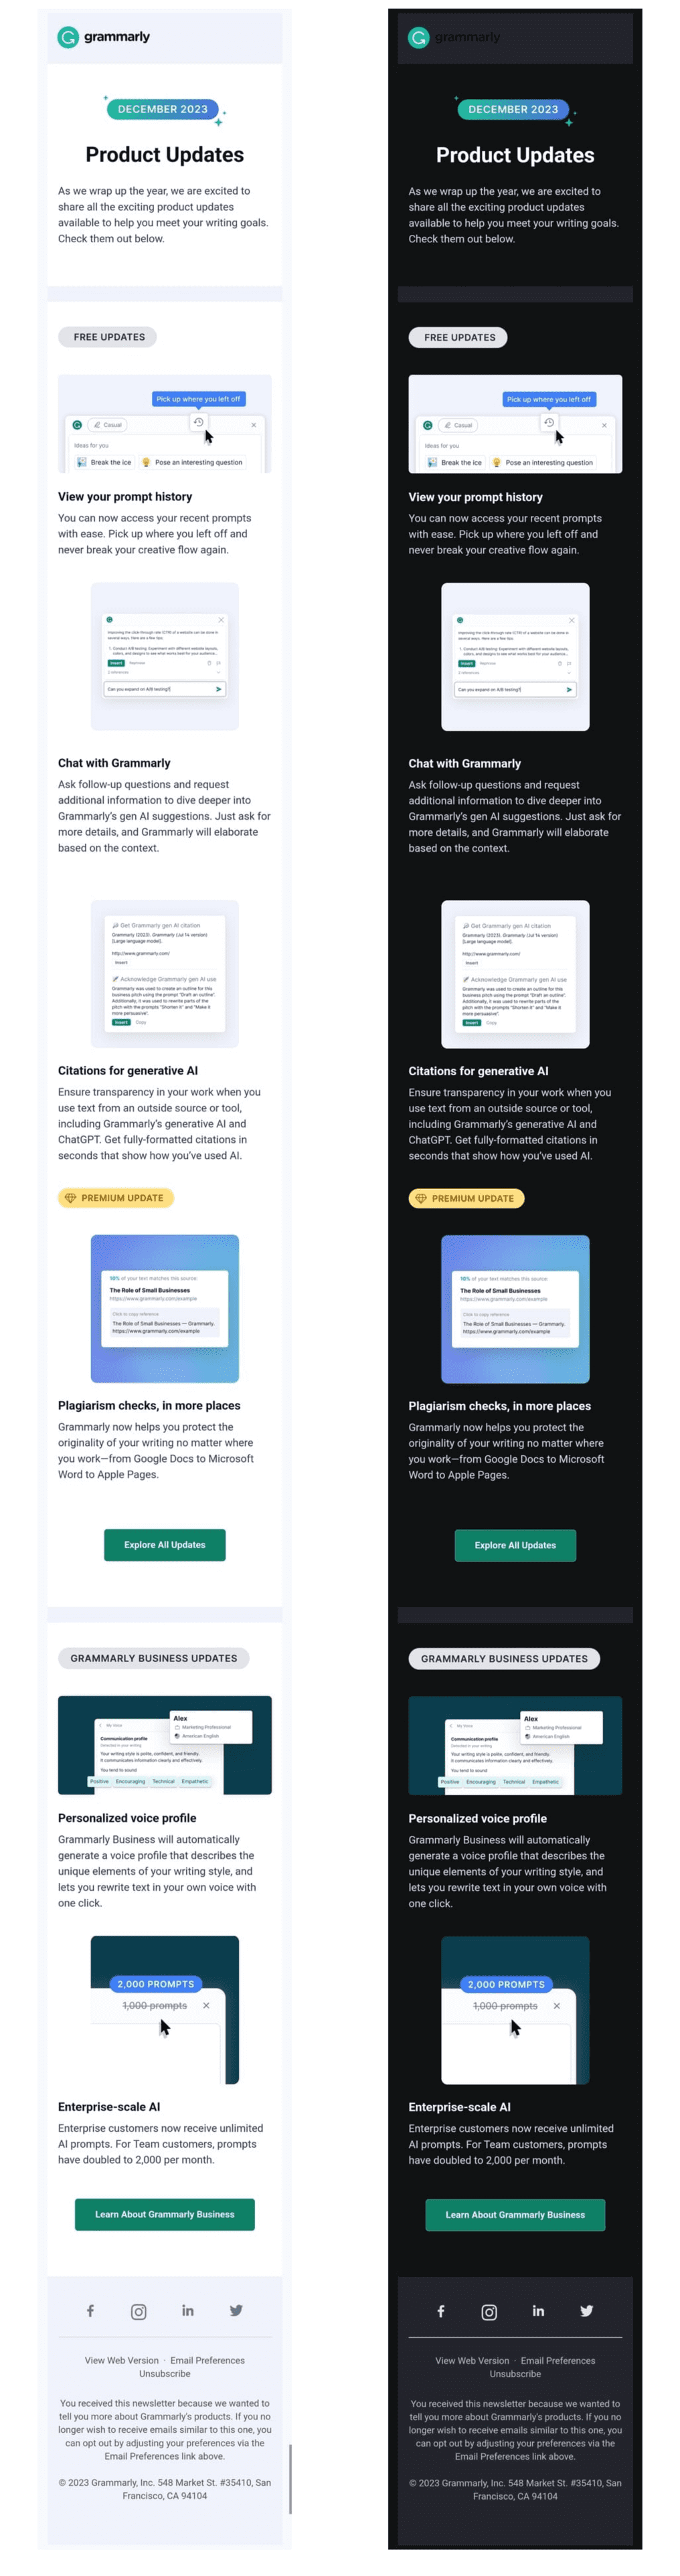 A Grammarly email versions in light and dark modes side by side